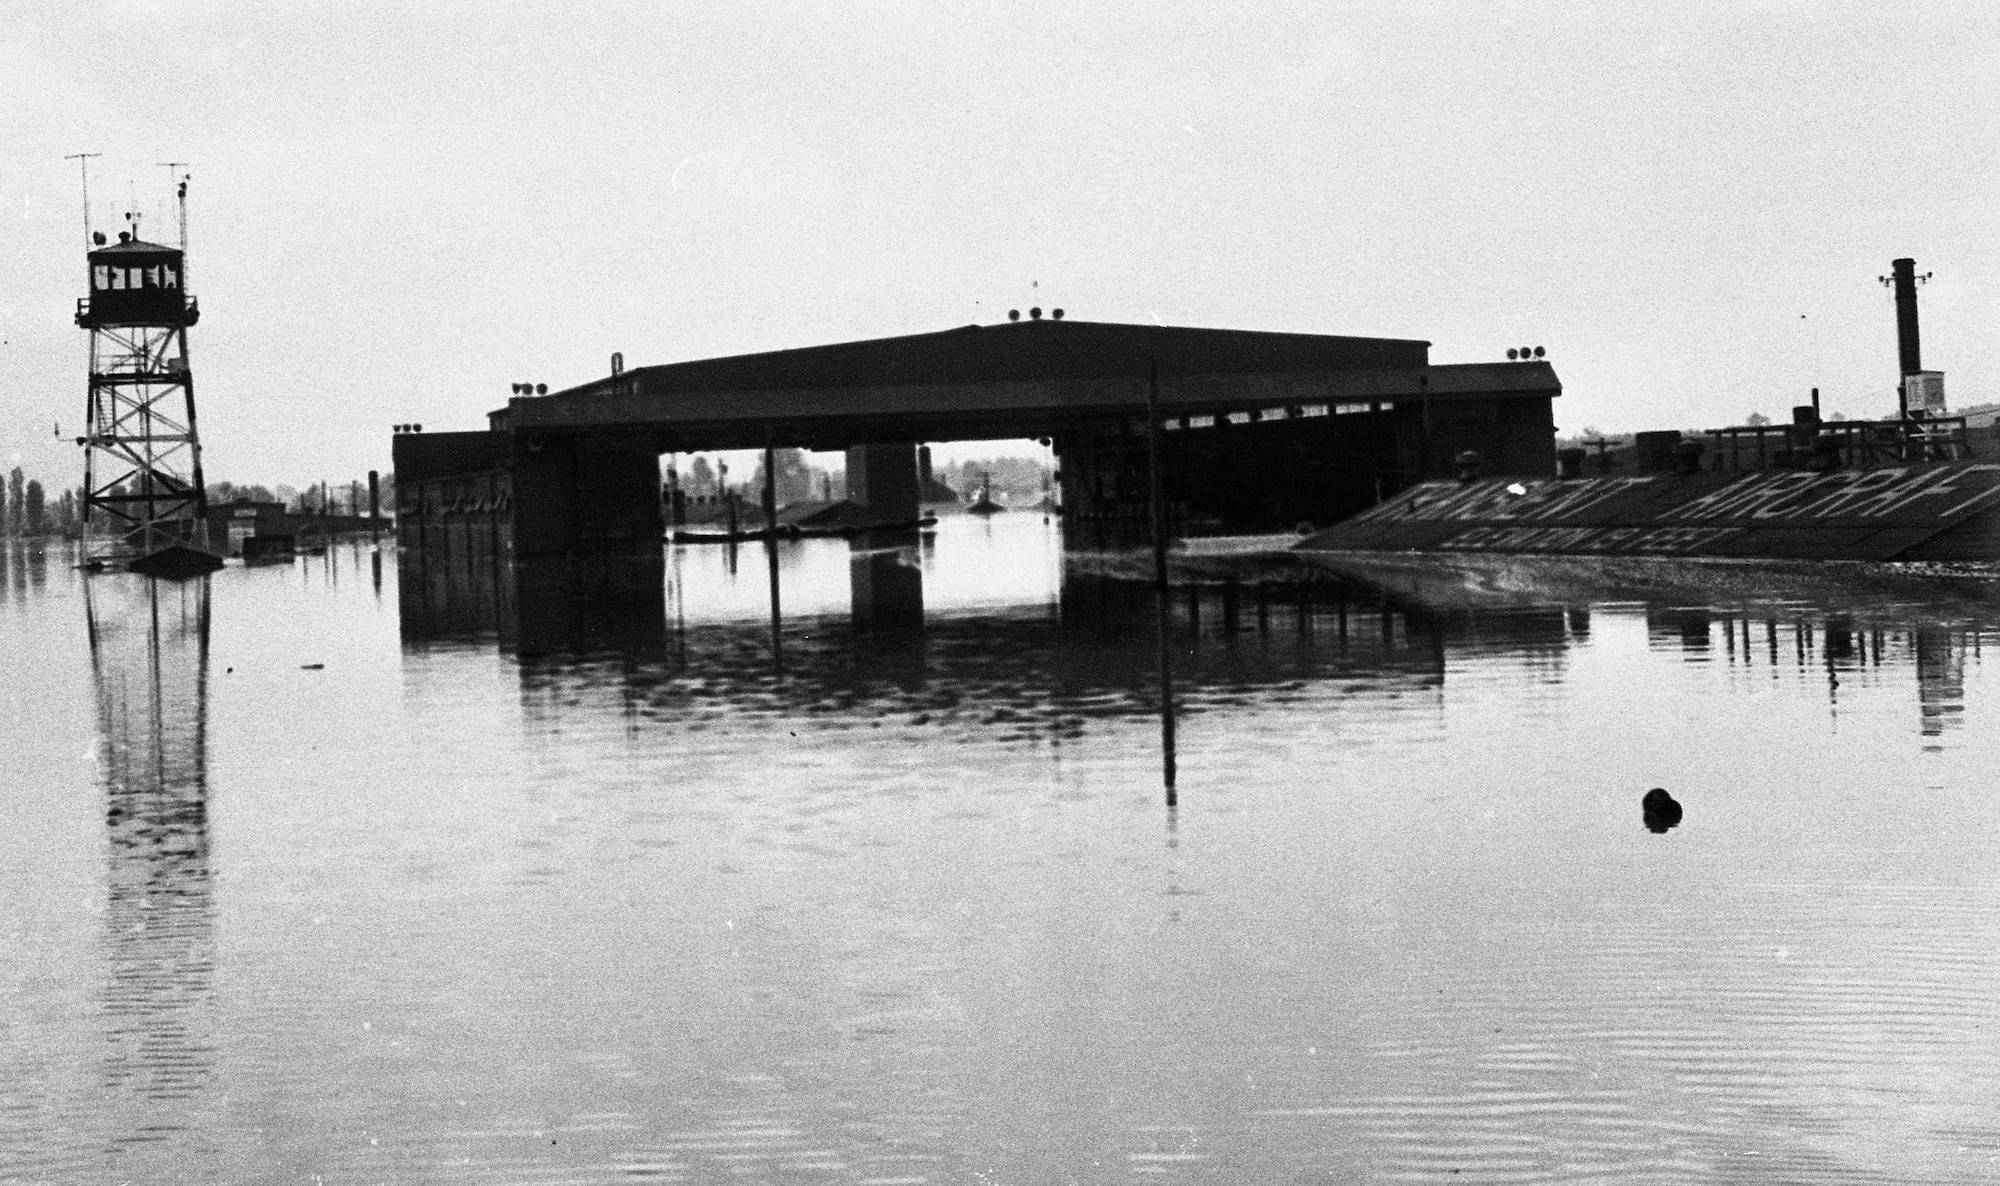 On Memorial Day, May 30, 1948, the Vanport flood engulfed the Portland Air National Guard Base, Portland, Ore. This image depicts the flooding effects of one of the base hangars several days after the flood waters breached the Columbia River. (Oregon Air National Guard historical photo). 